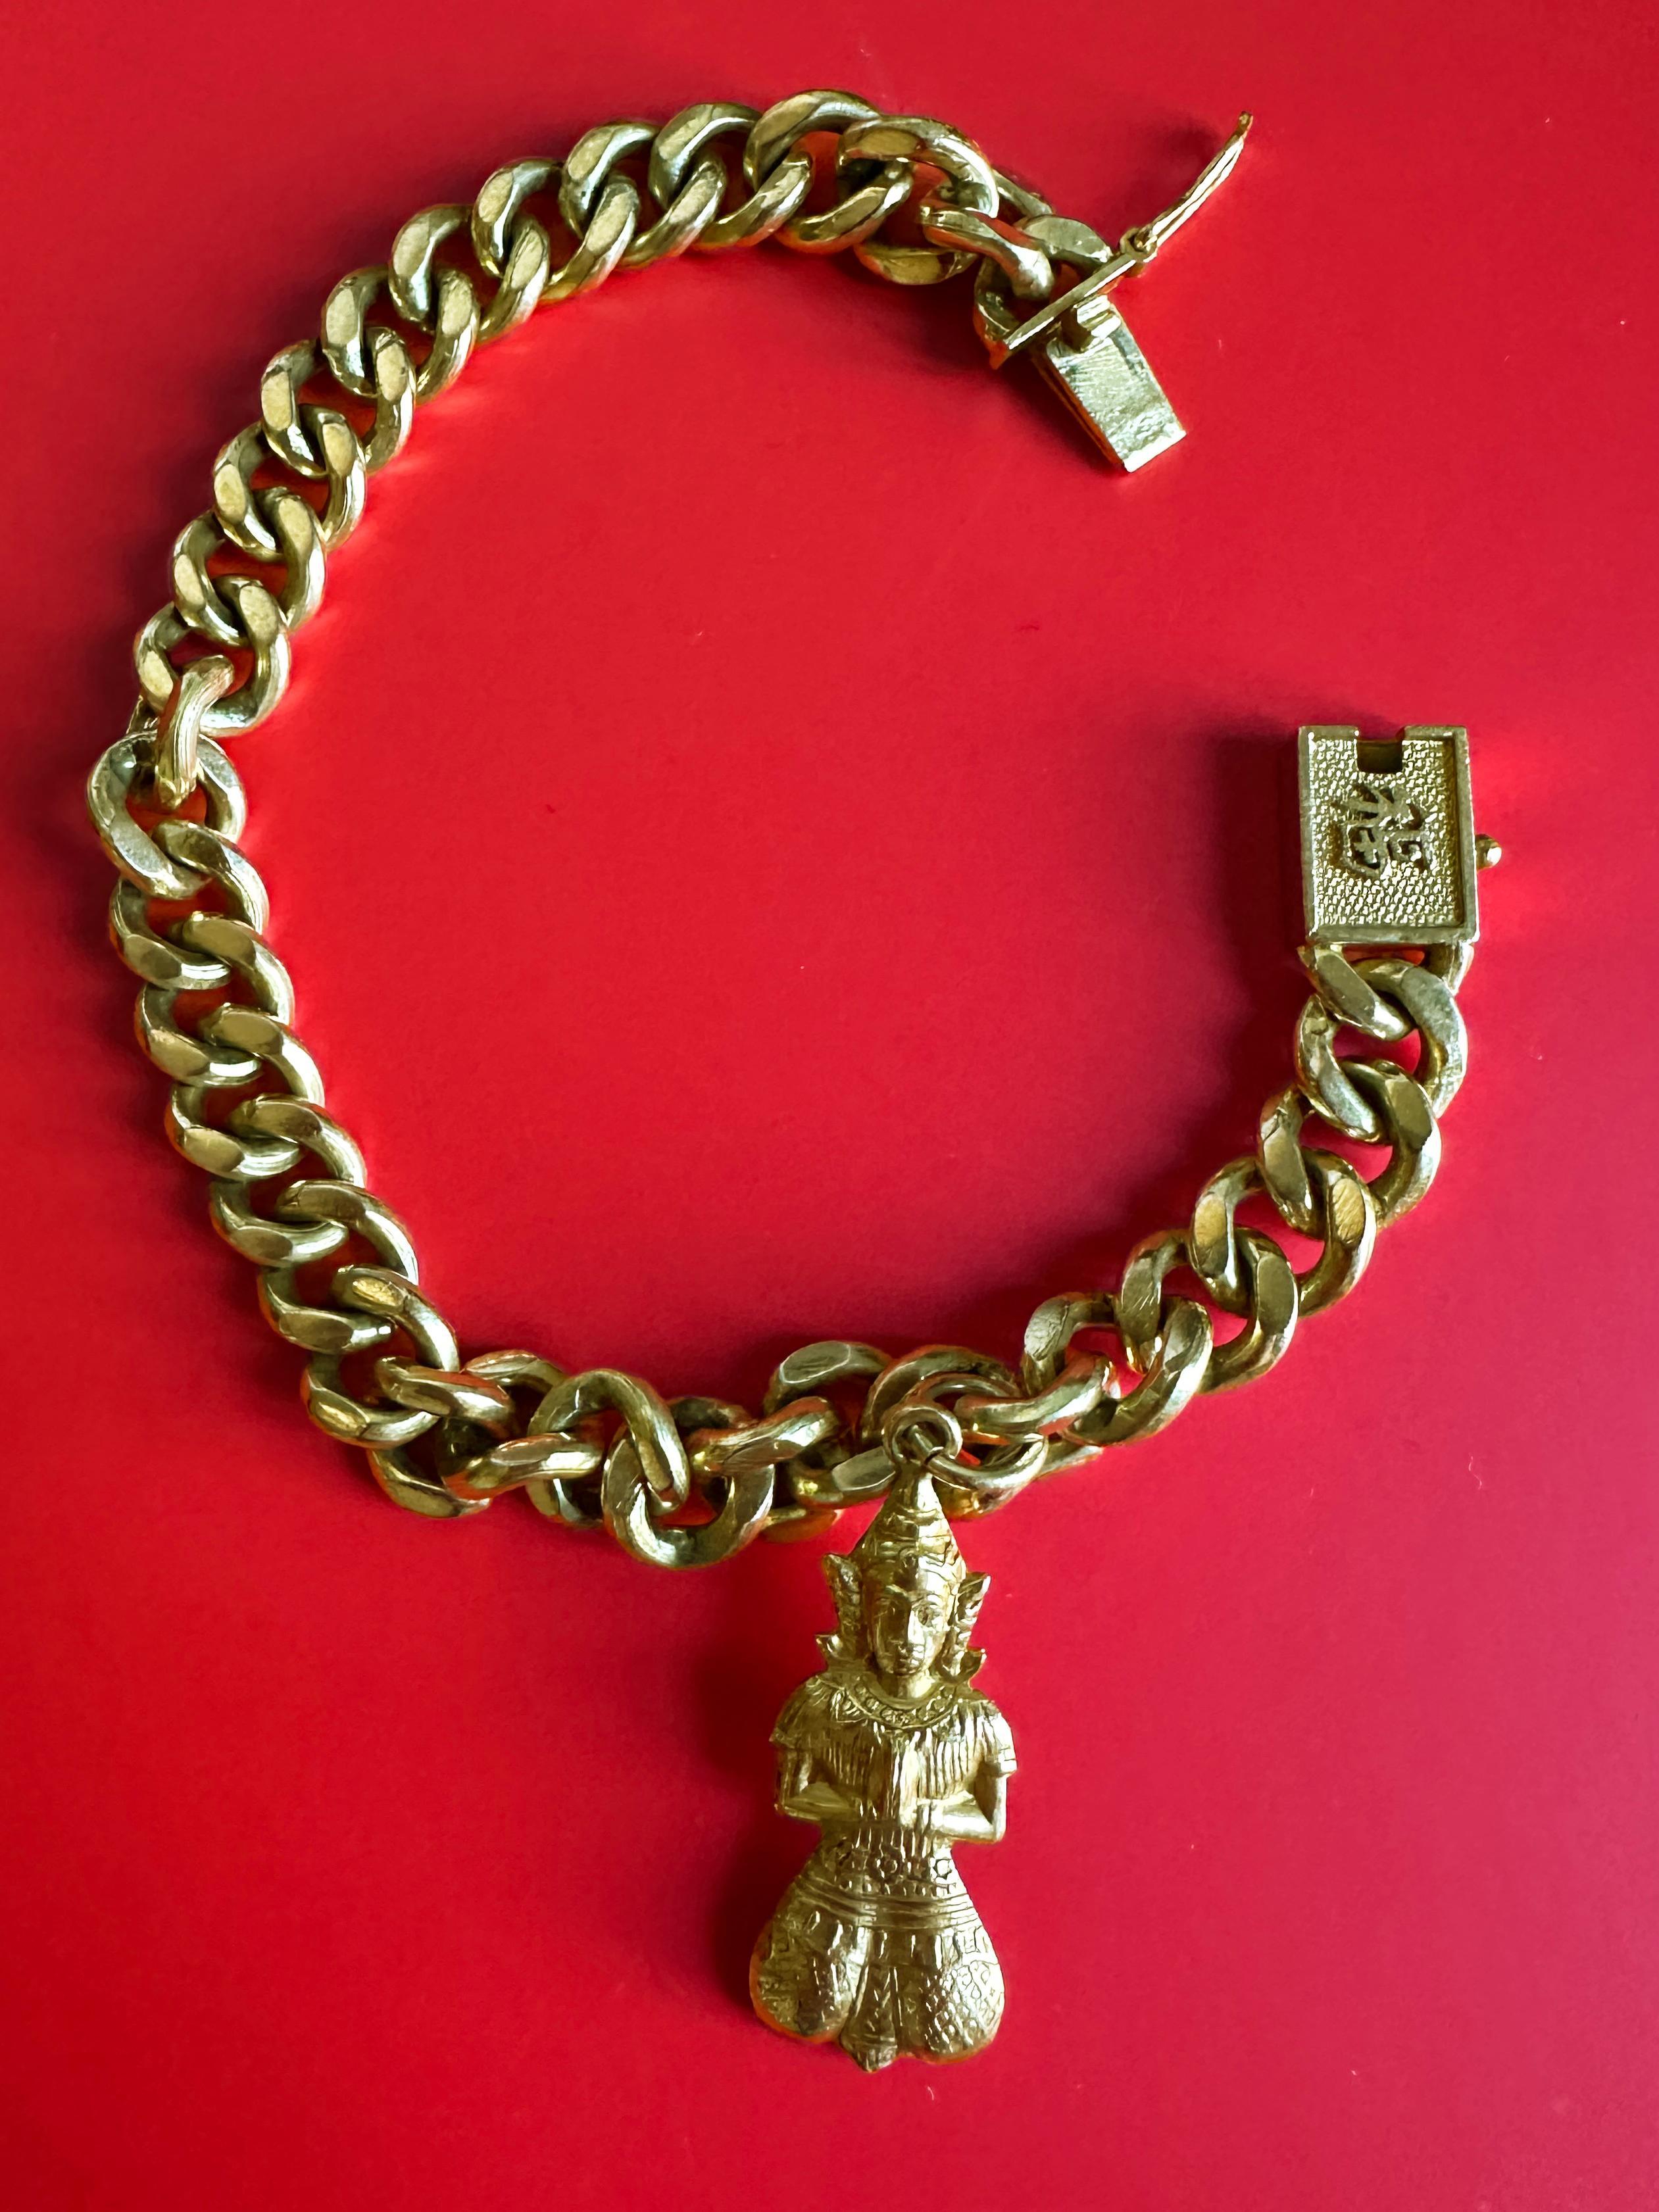 Women's 14k Good Fortune Bracelet with Chinese Character For Sale